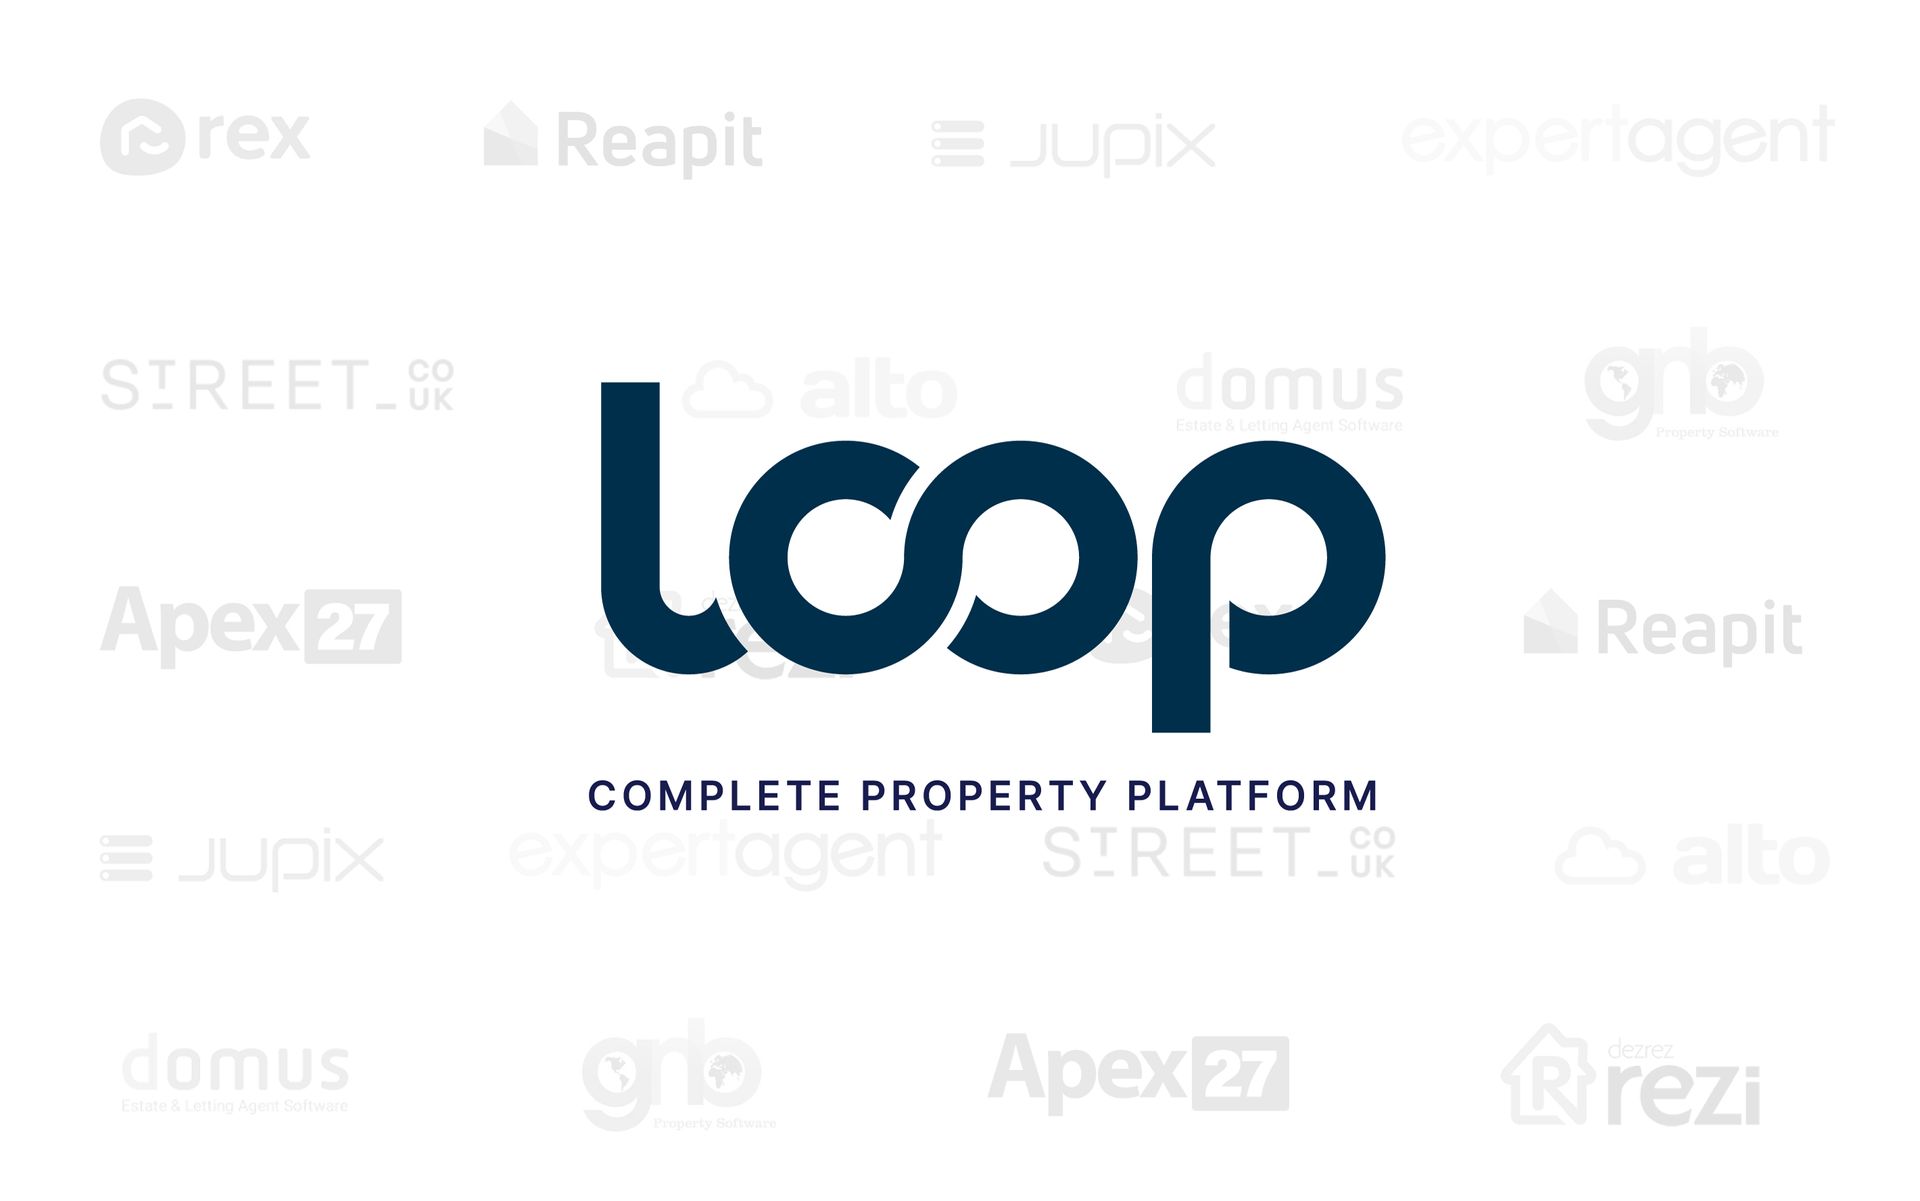 The logo for loop is surrounded by other logos on a white background.